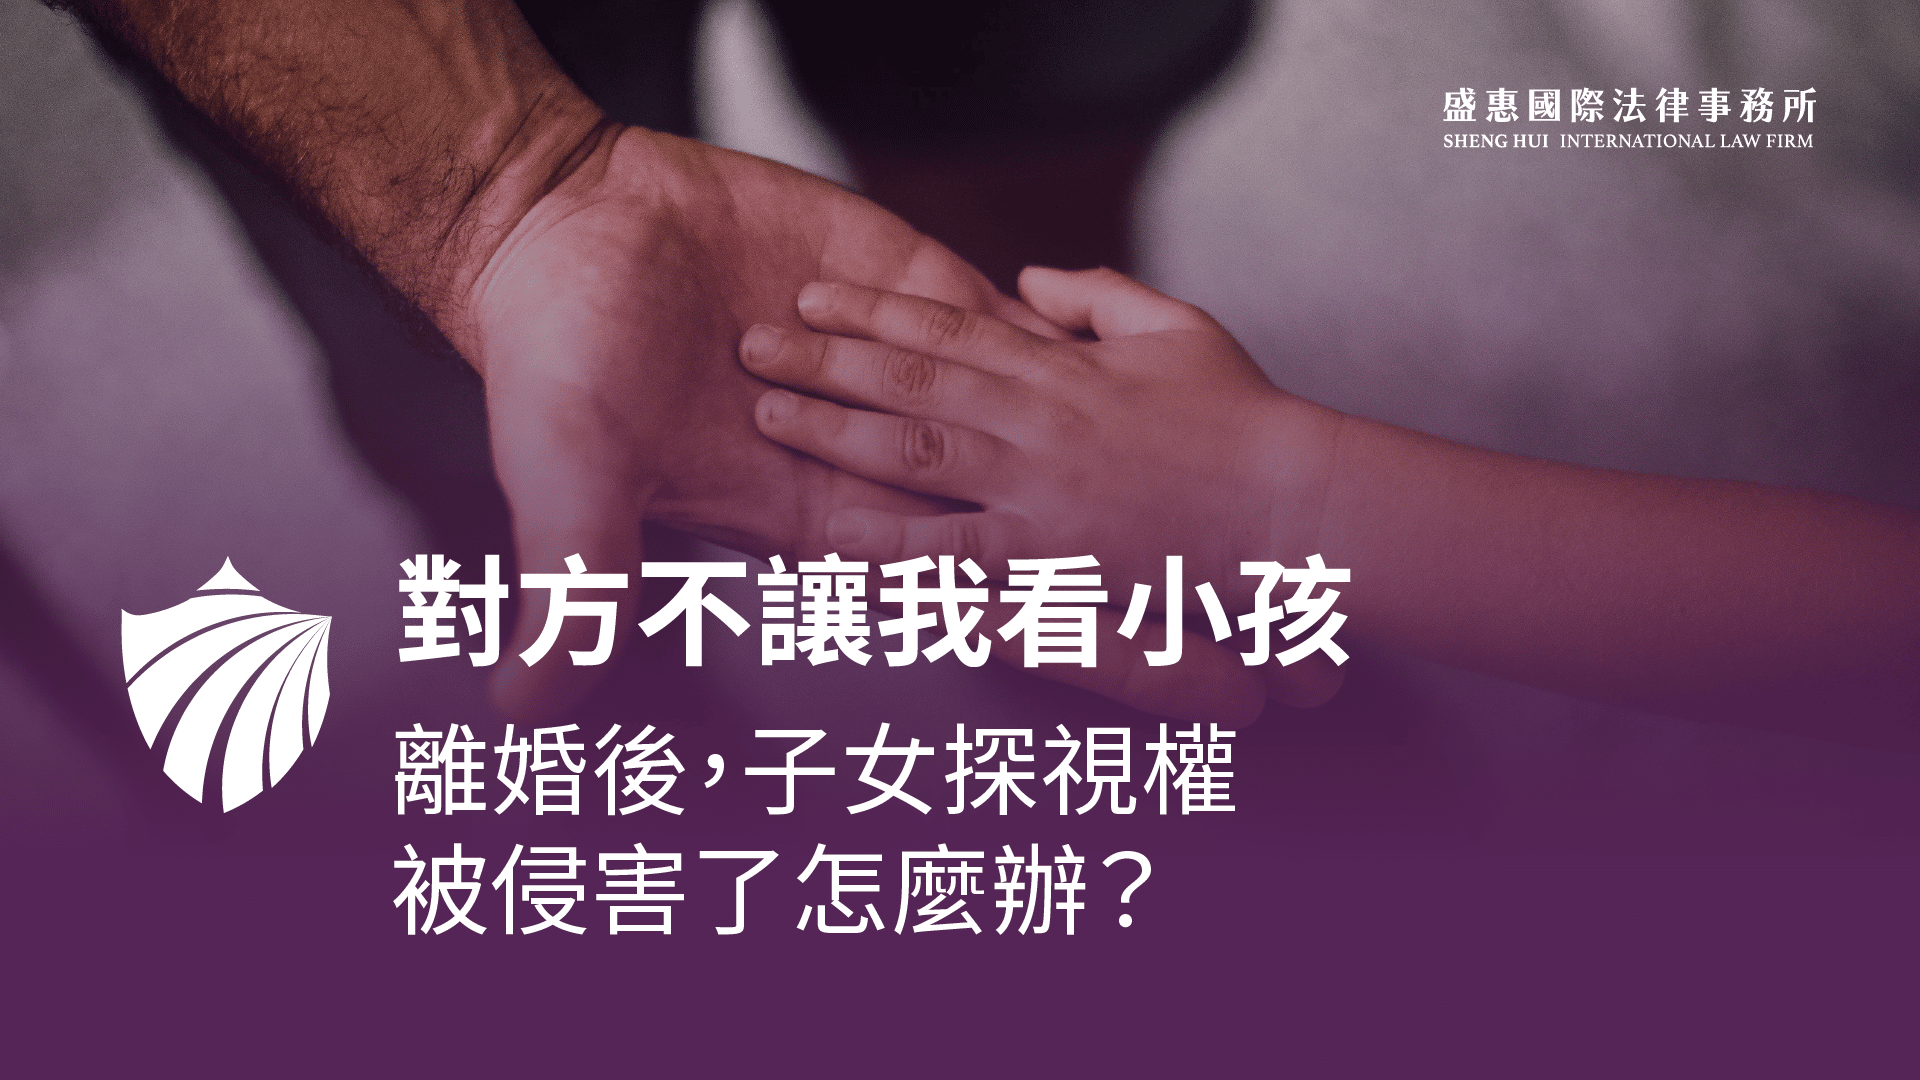 Read more about the article 探視小孩的探視權被侵害了該怎麼辦?